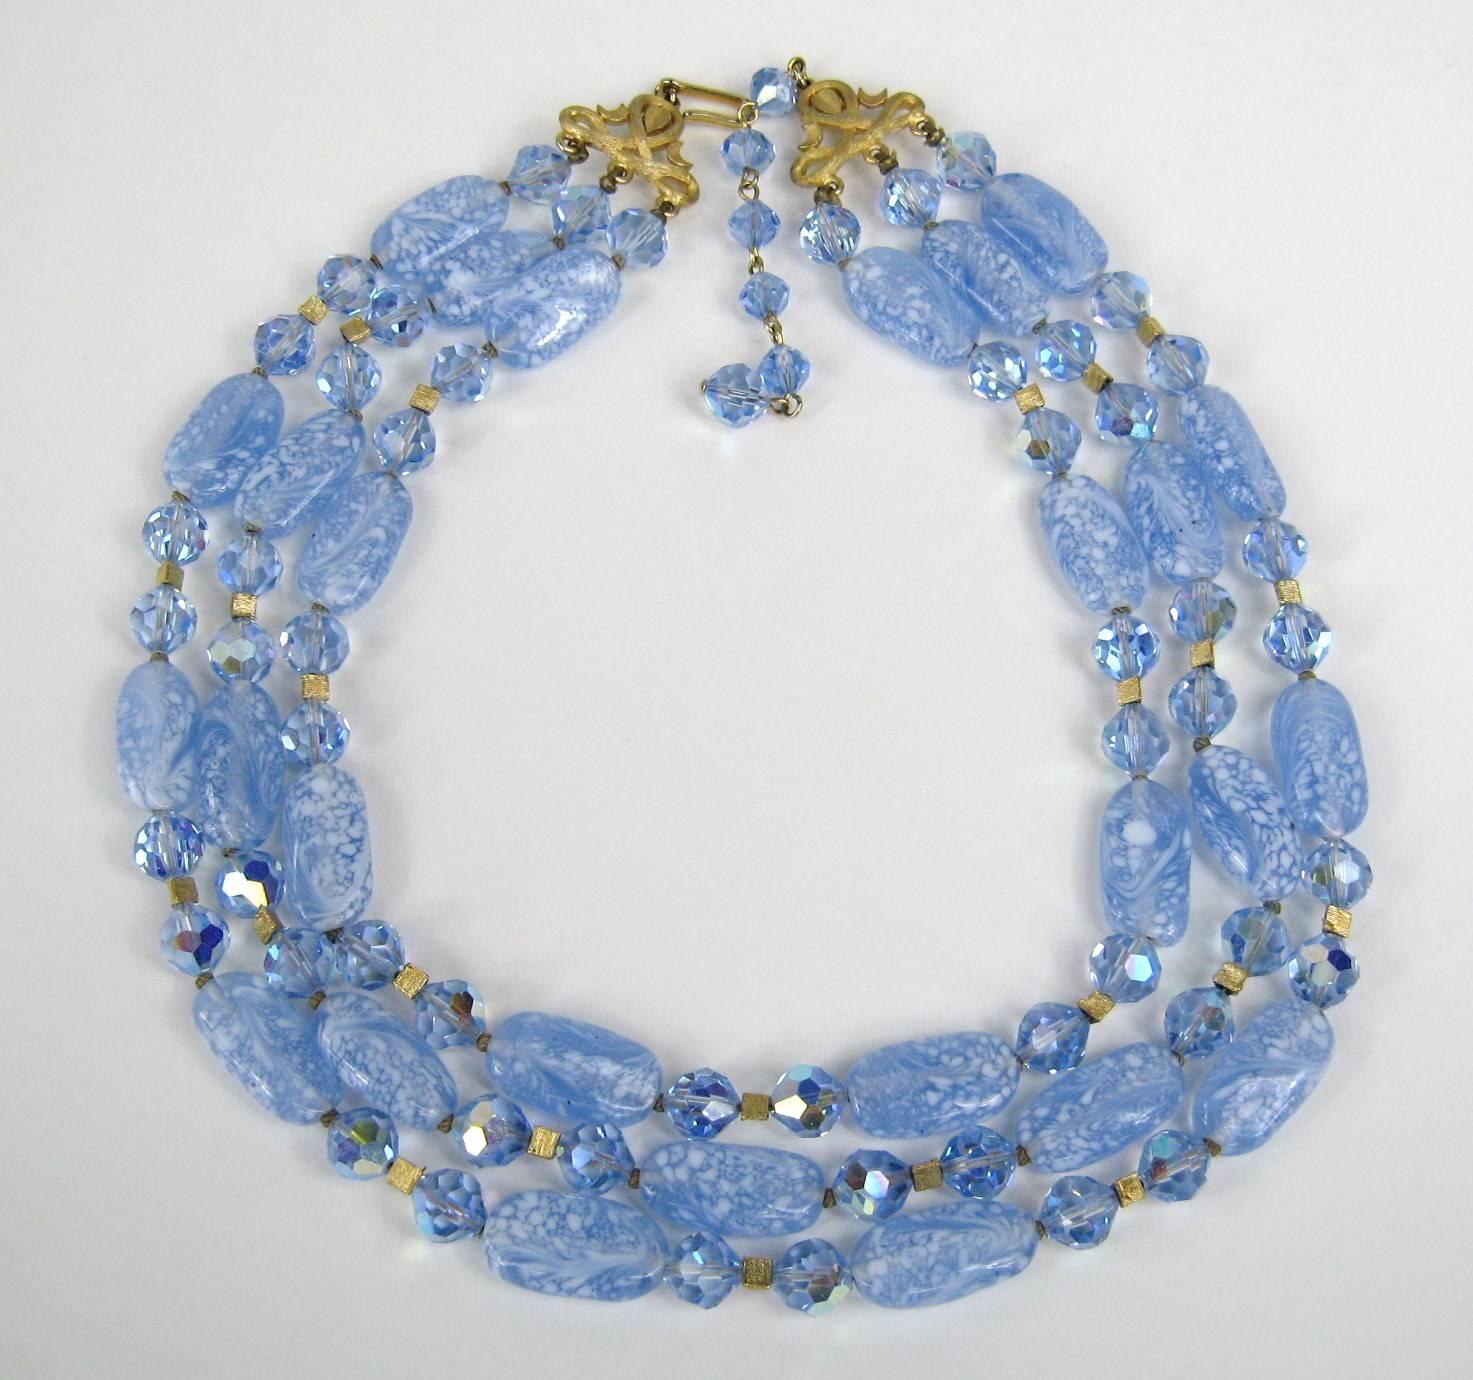 A stunning Trifari 3 strand bib Necklace with faceted Auroura Borilias Beads running in between the larger swirled glass beads. Length ranging from 14 inches to 16 inches on the BIB necklace Barrel beads .21.07 mm X 11.50 mm. 8.50mm smaller round